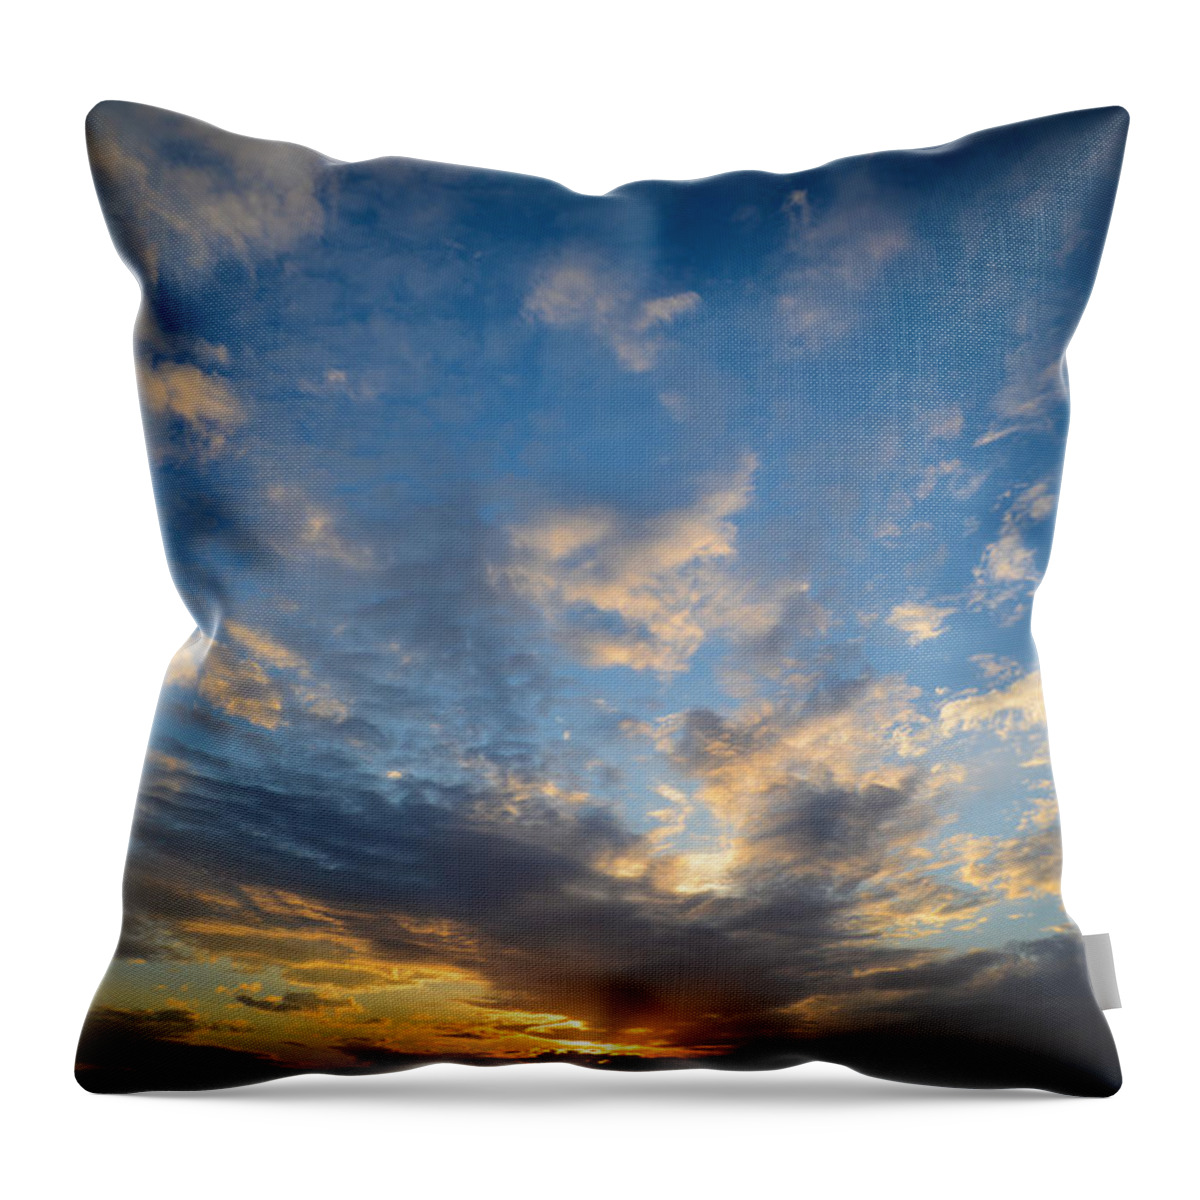 Sunset Throw Pillow featuring the photograph Liminal by Alex Blondeau